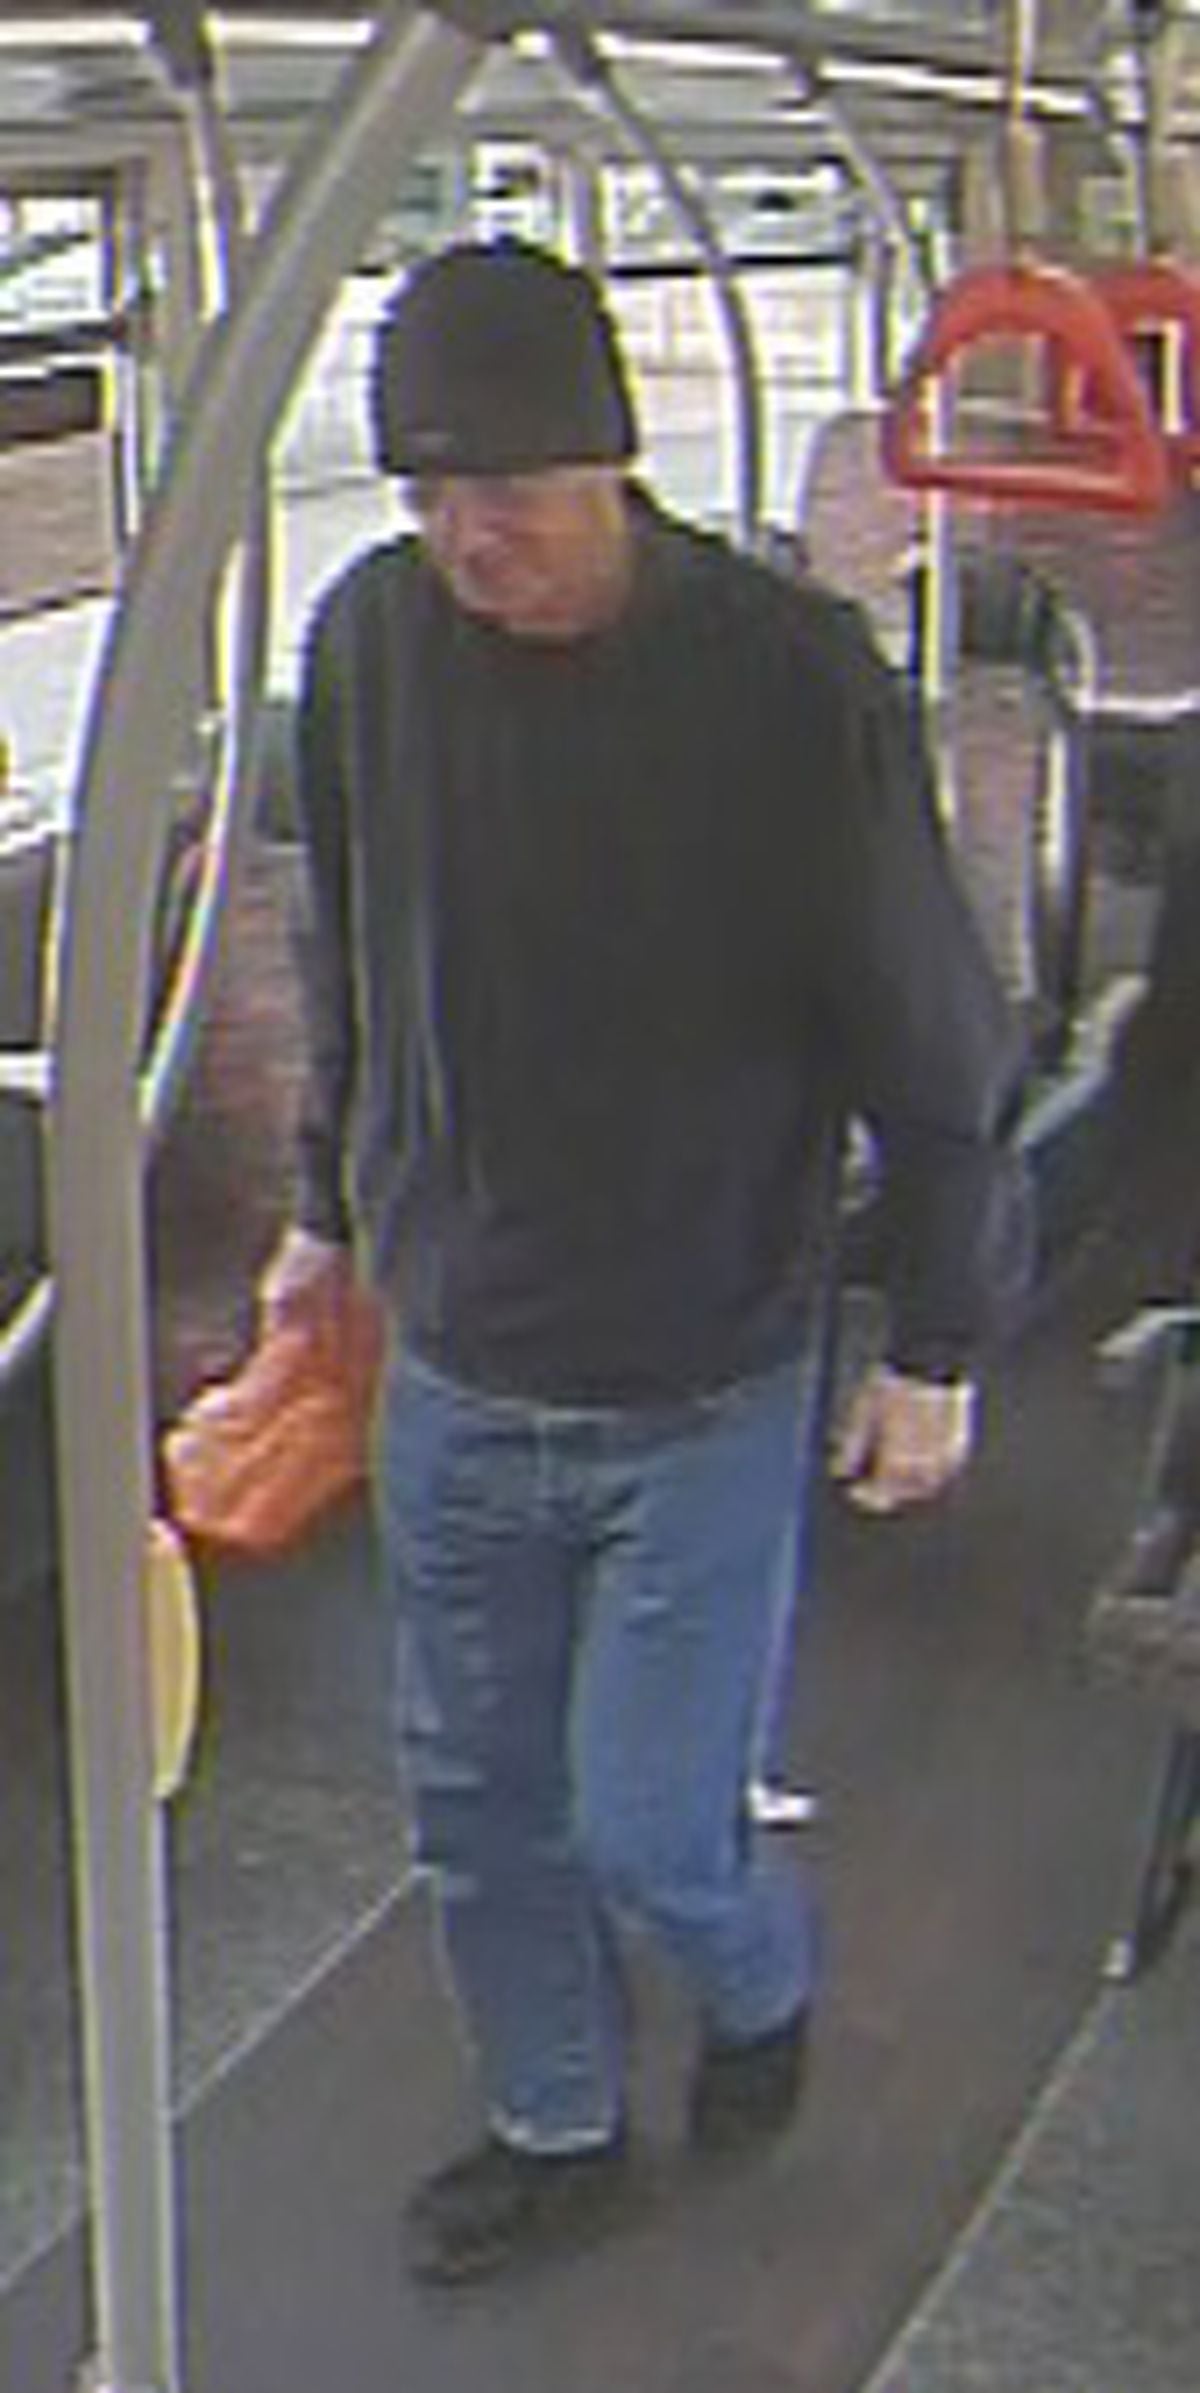 CCTV image released of Brian who went missing on Sunday, June 26